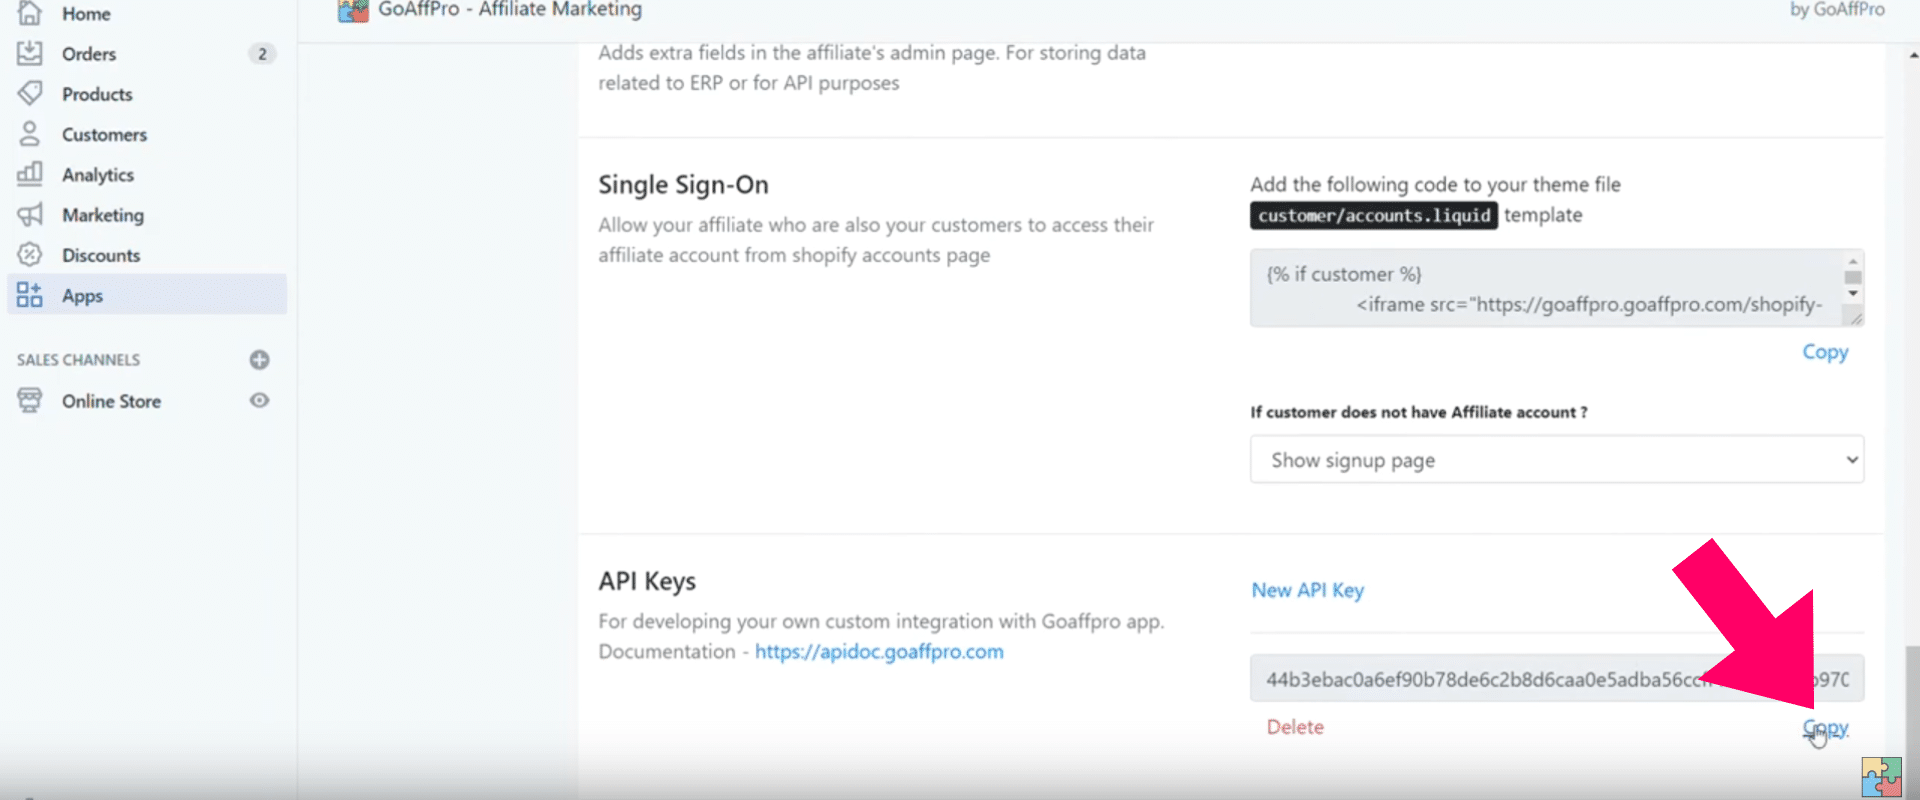 Screenshot of a Shopify web page showing settings for a "GoAffPro - Affiliate Marketing" app. The "API Keys" section is visible with a new key partially hidden. A large red arrow points to the "Copy" link.